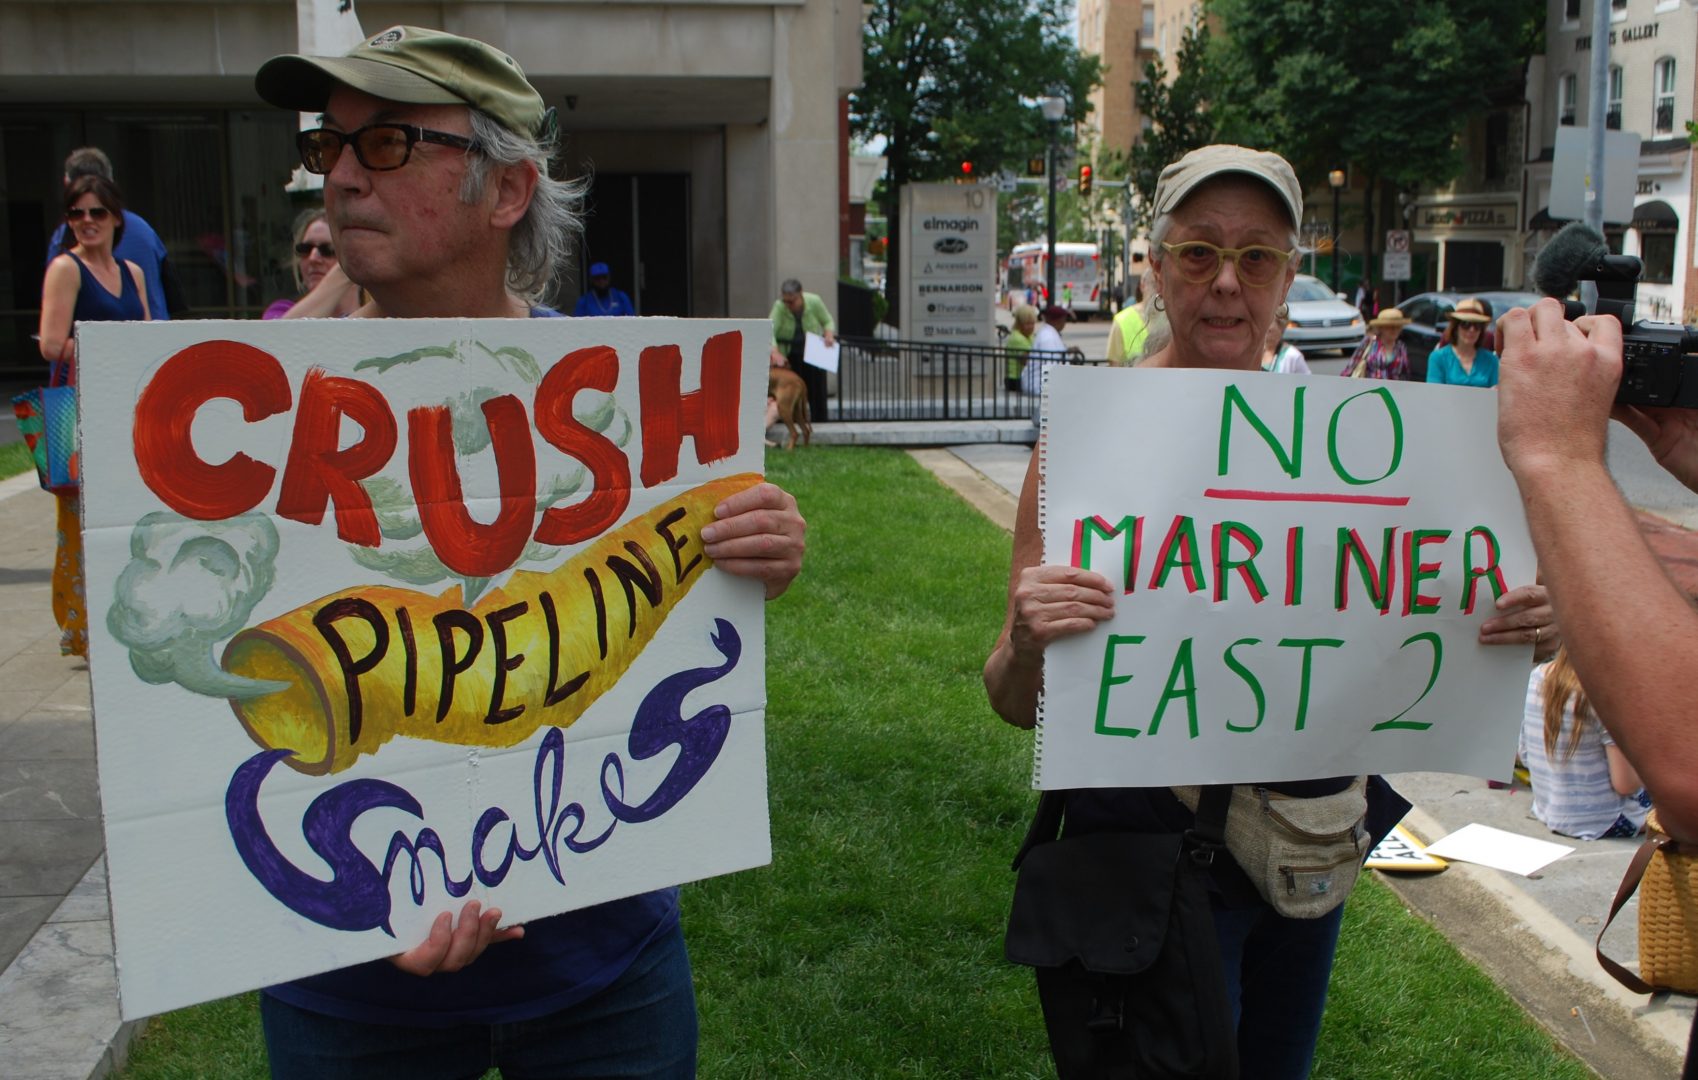 About 150 people showed up at a rally in West Chester on Jun 9 to urge the state's Public Utility Commission to shut down Sunoco's Mariner East pipeline project.